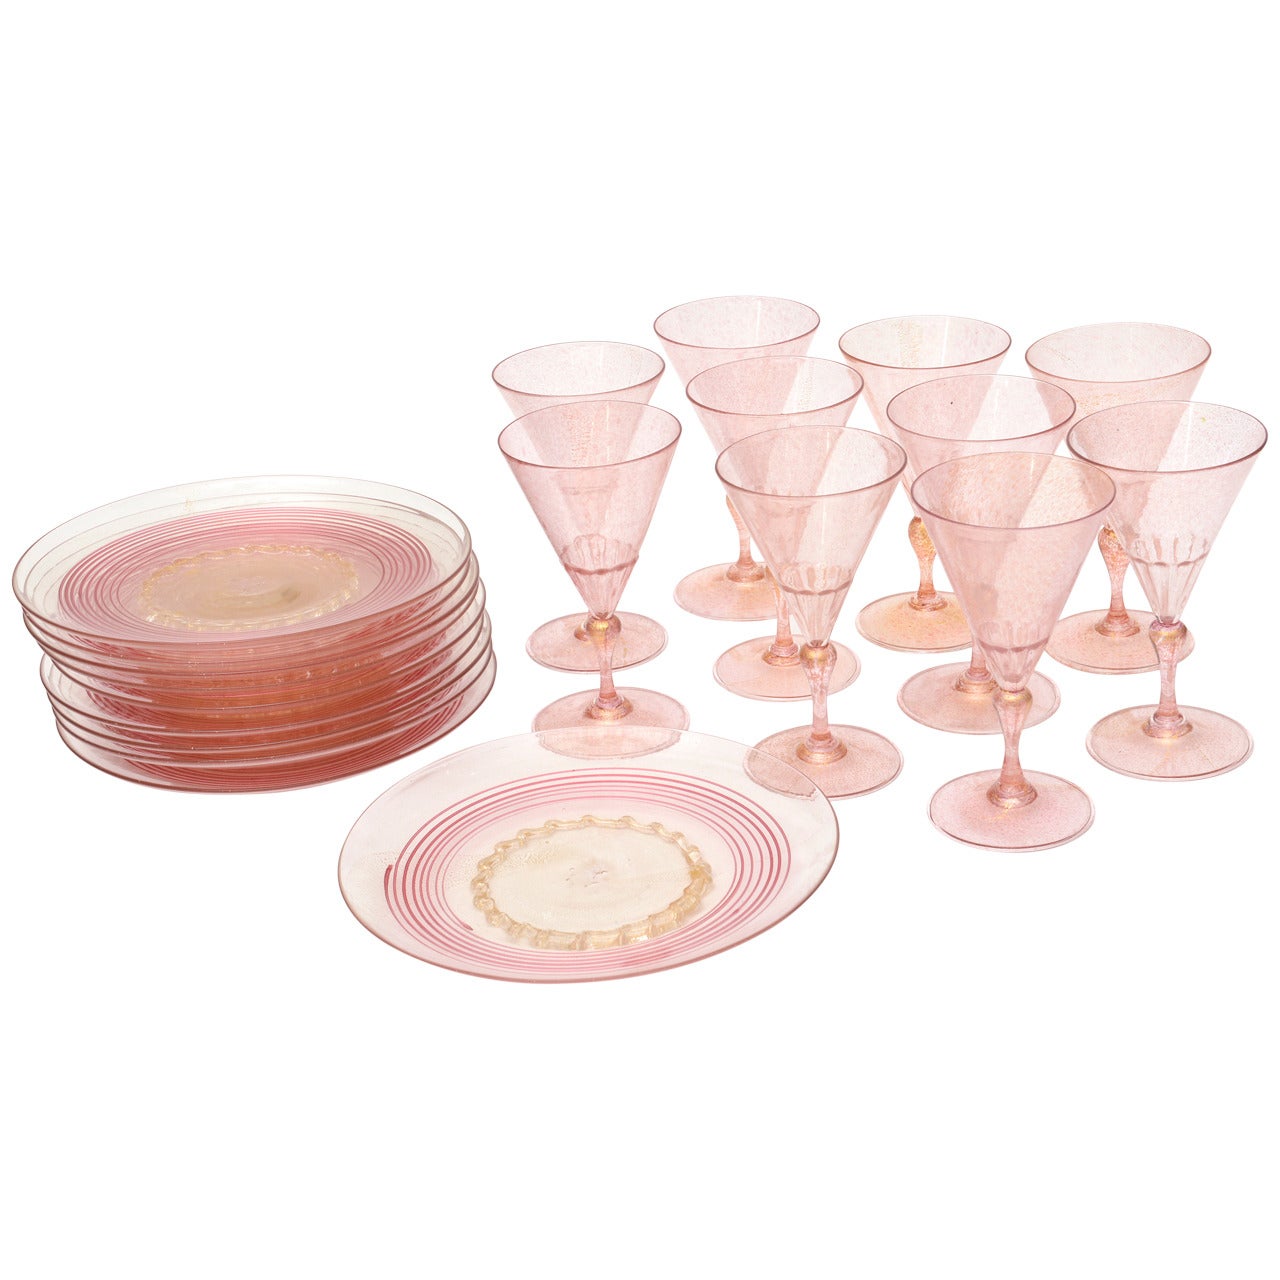 20 Italian Murano Glass Plates and Goblets with Gold Aventurine